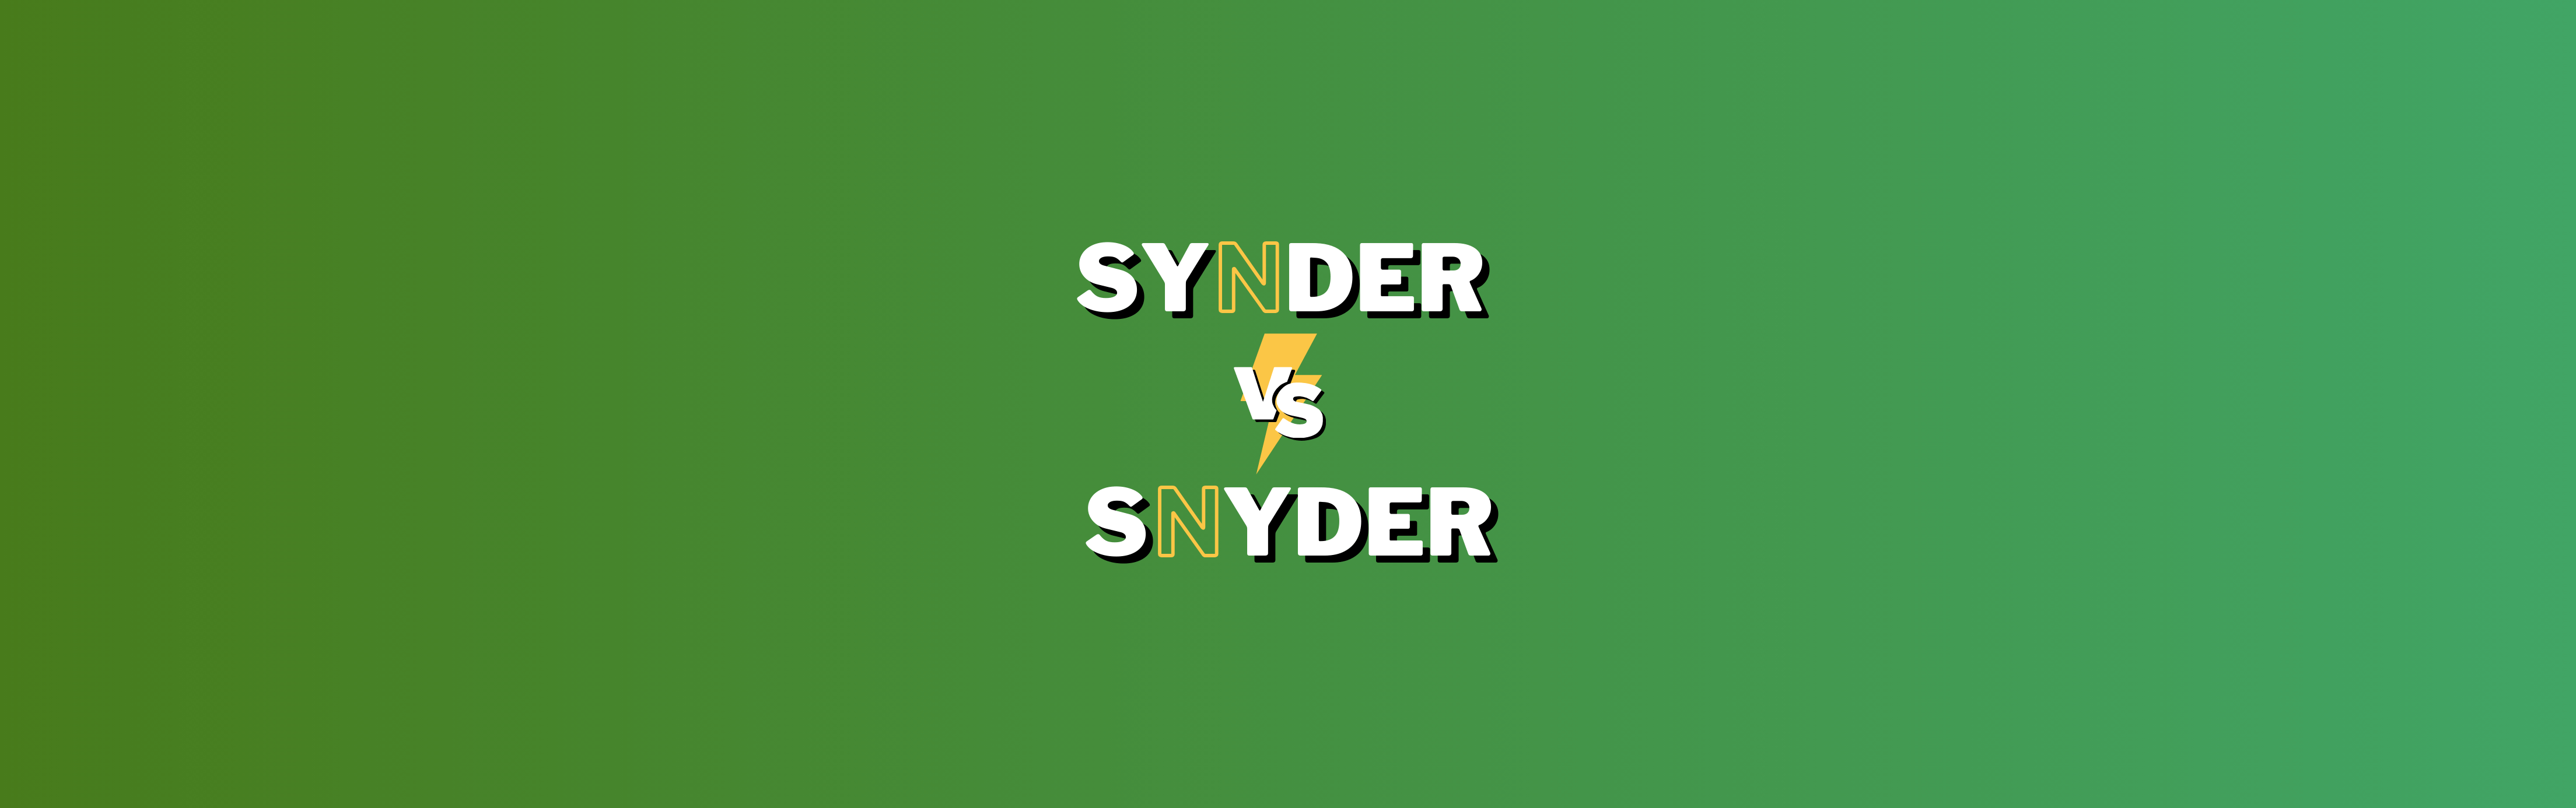 Snyder vs Synder: Getting Superhero Powers with the Perfect Accounting Tool